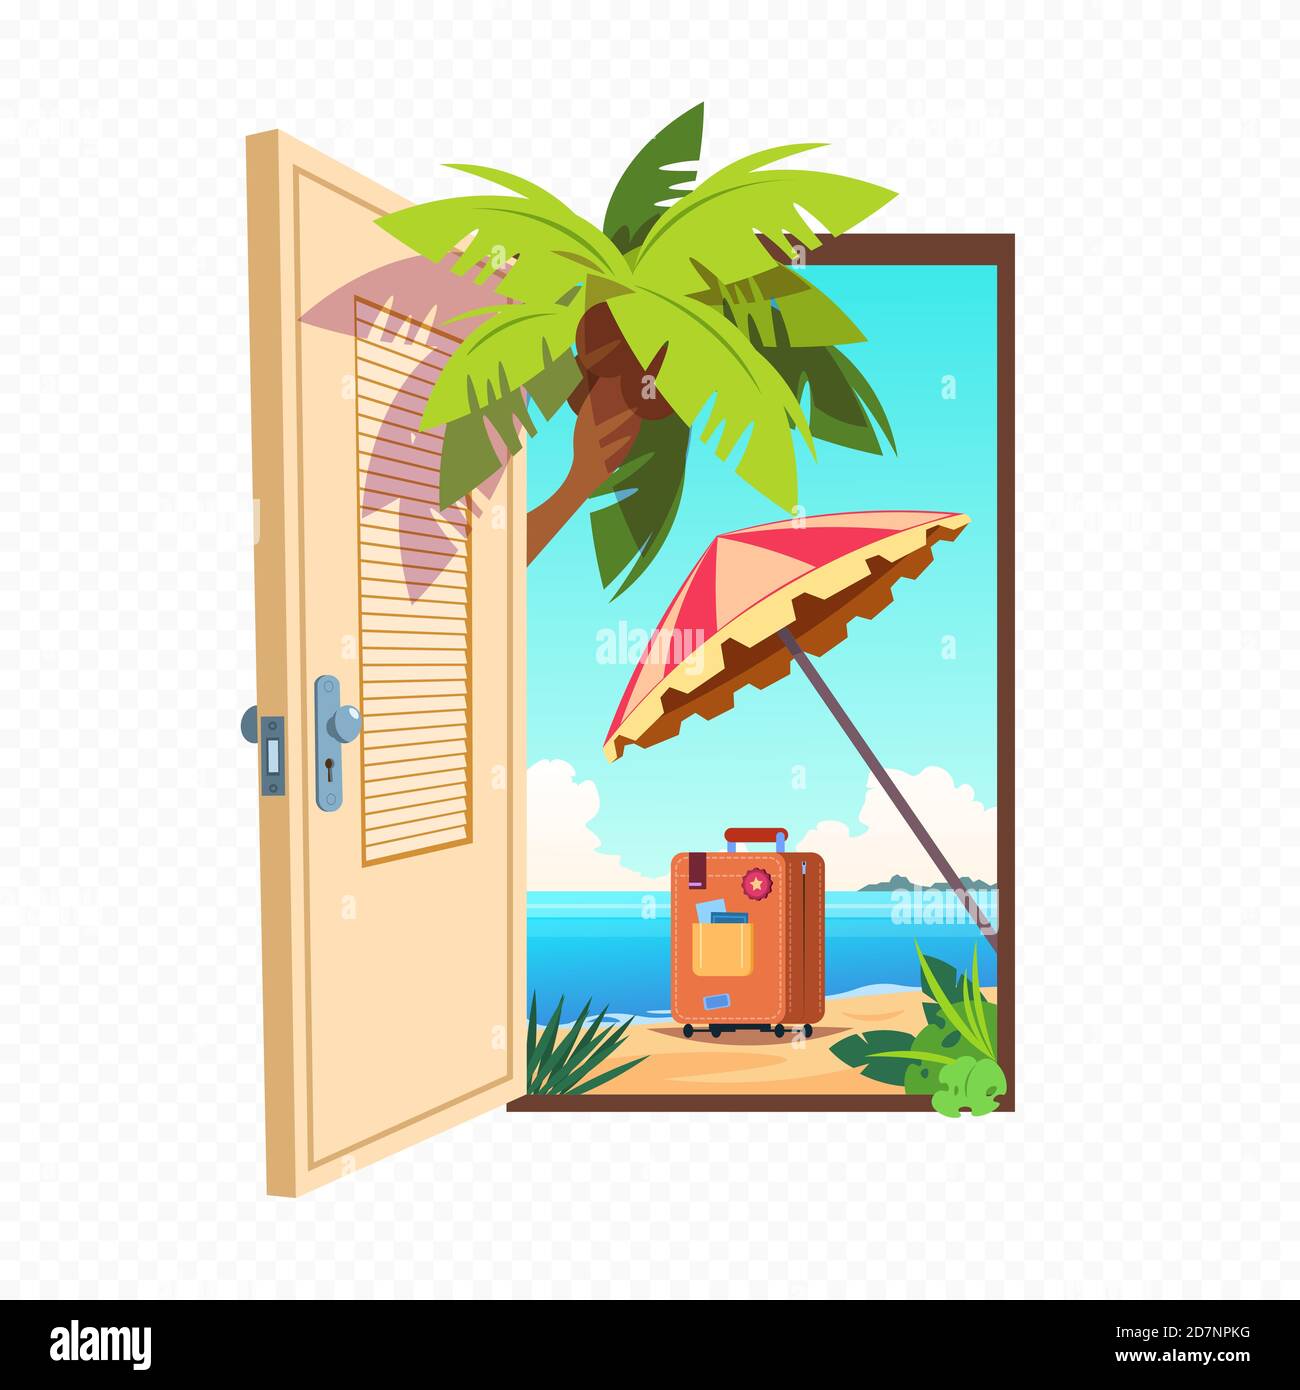 Opened spring door isolated on transparent background. Open entrance with summer landscape outdoor. Doorway to sea beach, paradise and travel illustration Stock Vector